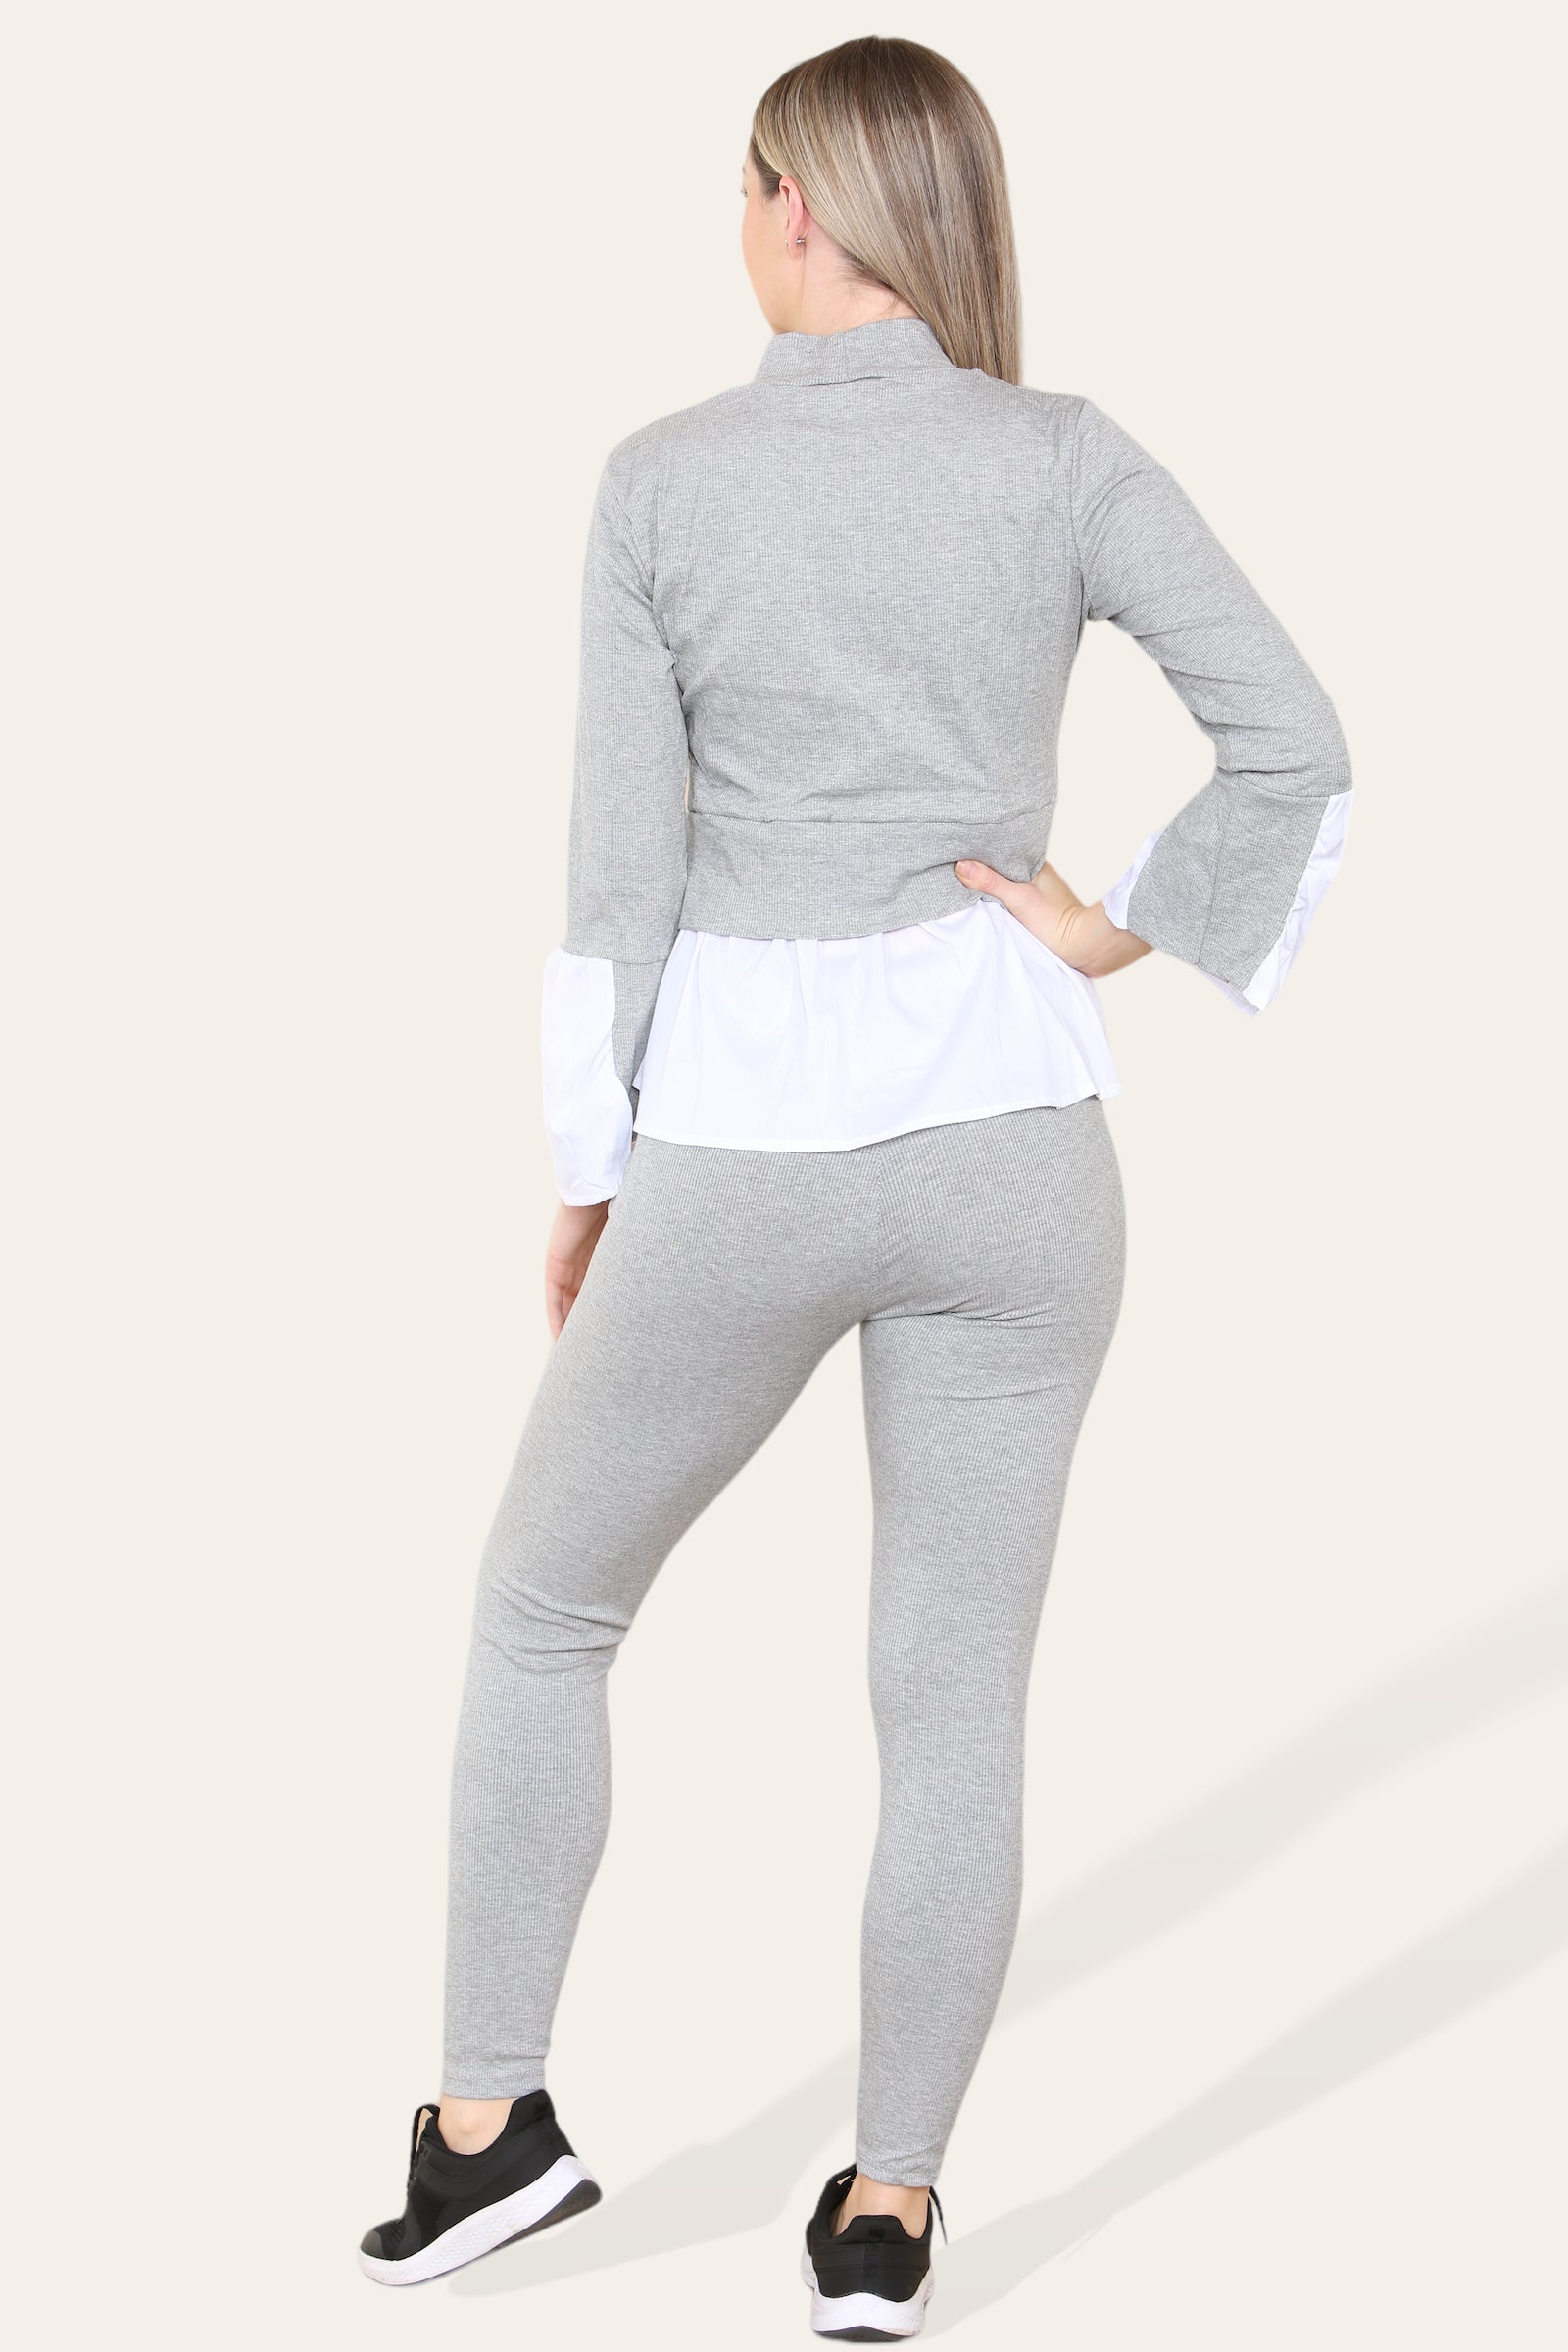 Ribbed Lounge Wear Flared Shirt and Leggings Co-Ord Set - Multi Trends